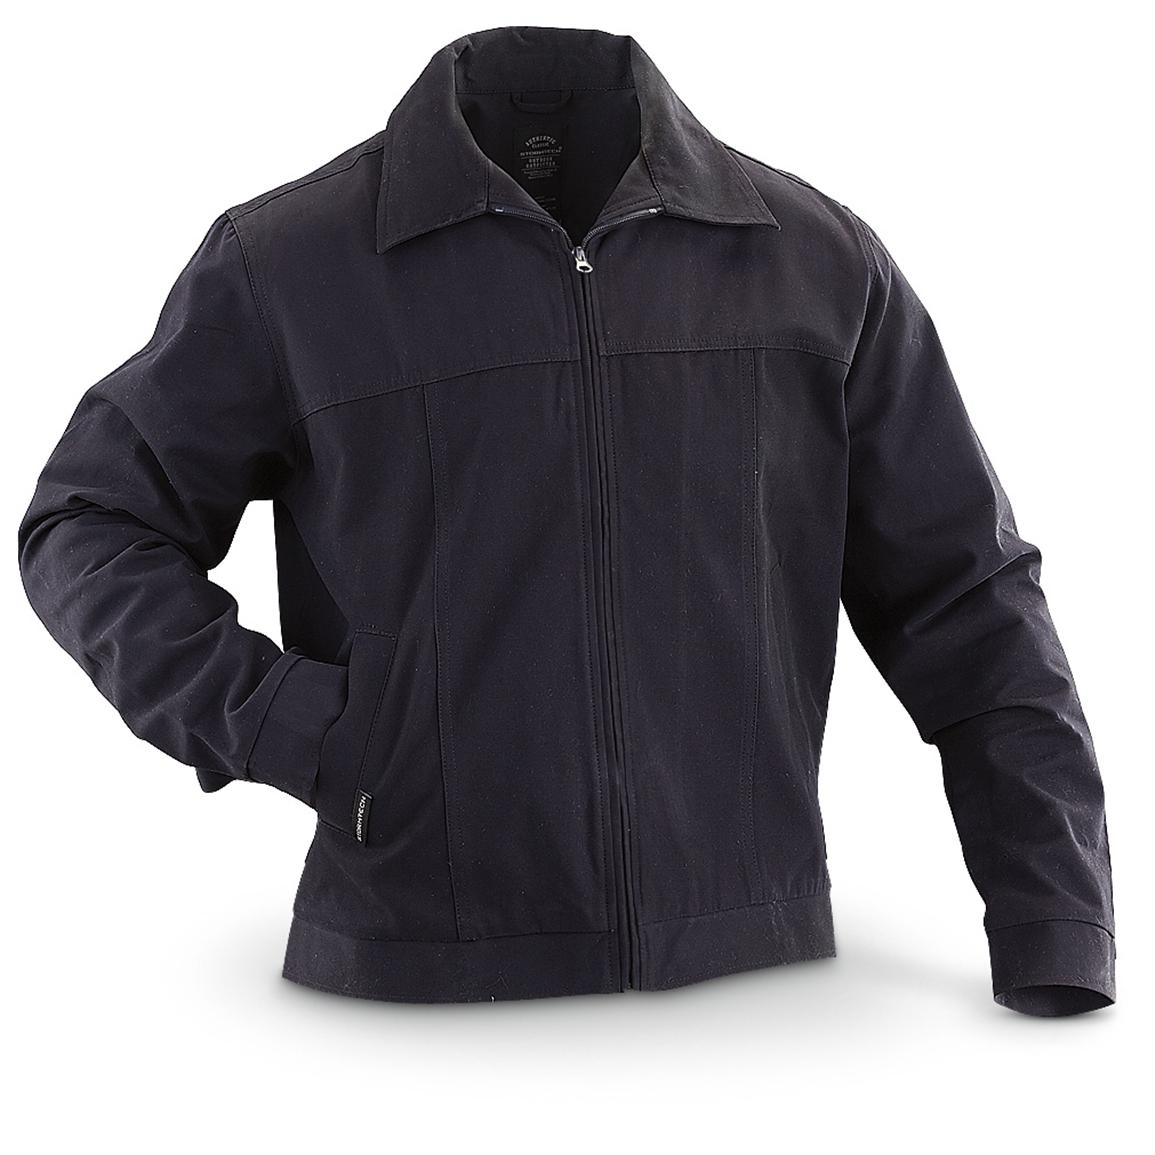 StormTech® Performance Jacket - 221108, Insulated Jackets & Coats at Sportsman's Guide1155 x 1155